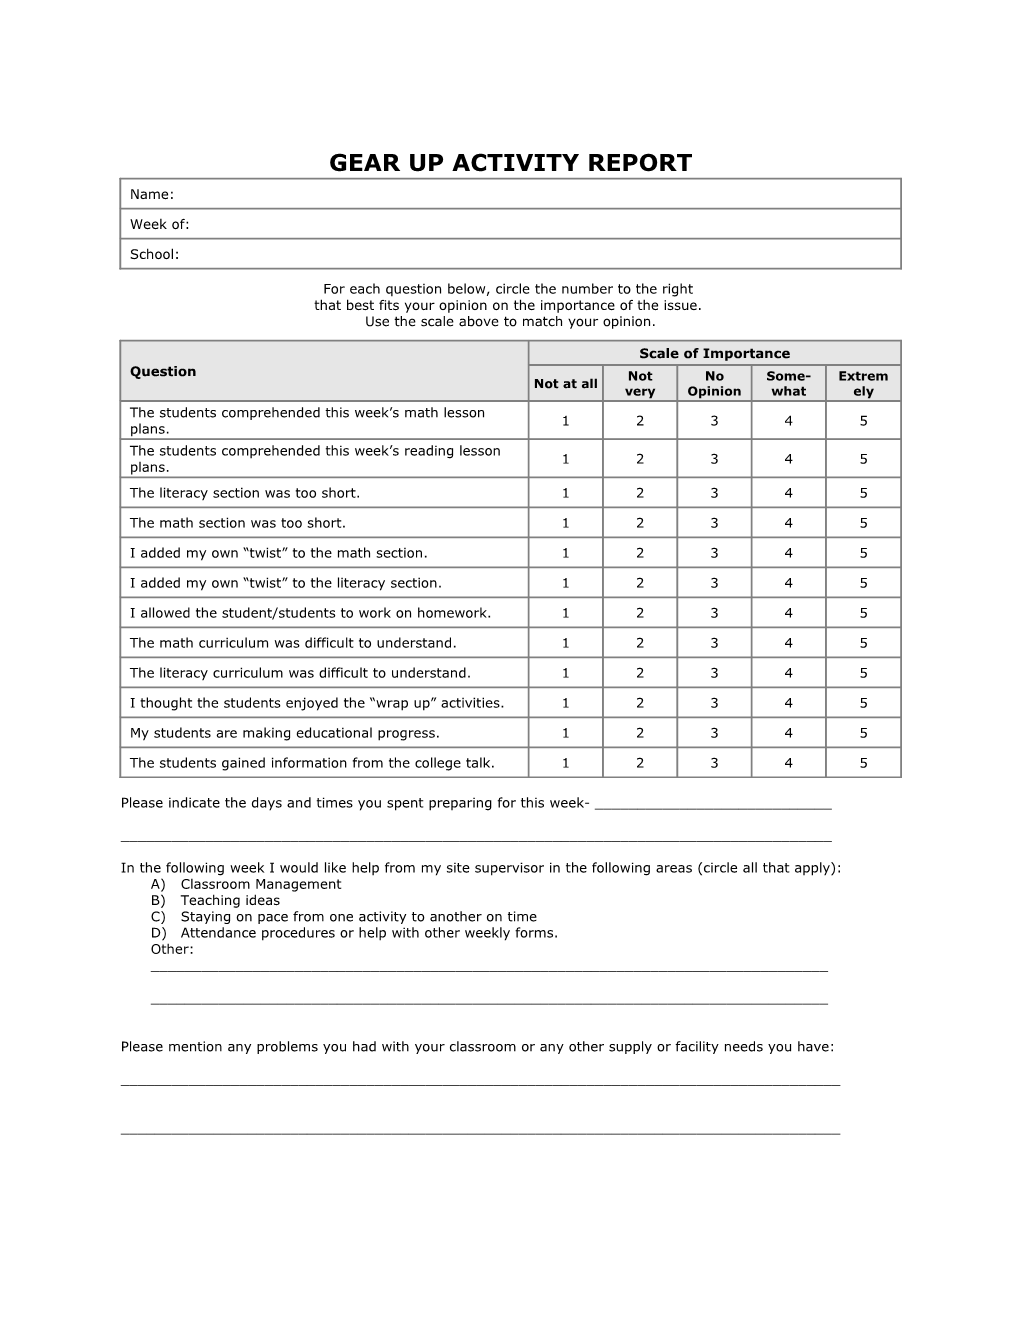 Gear up Activity Report